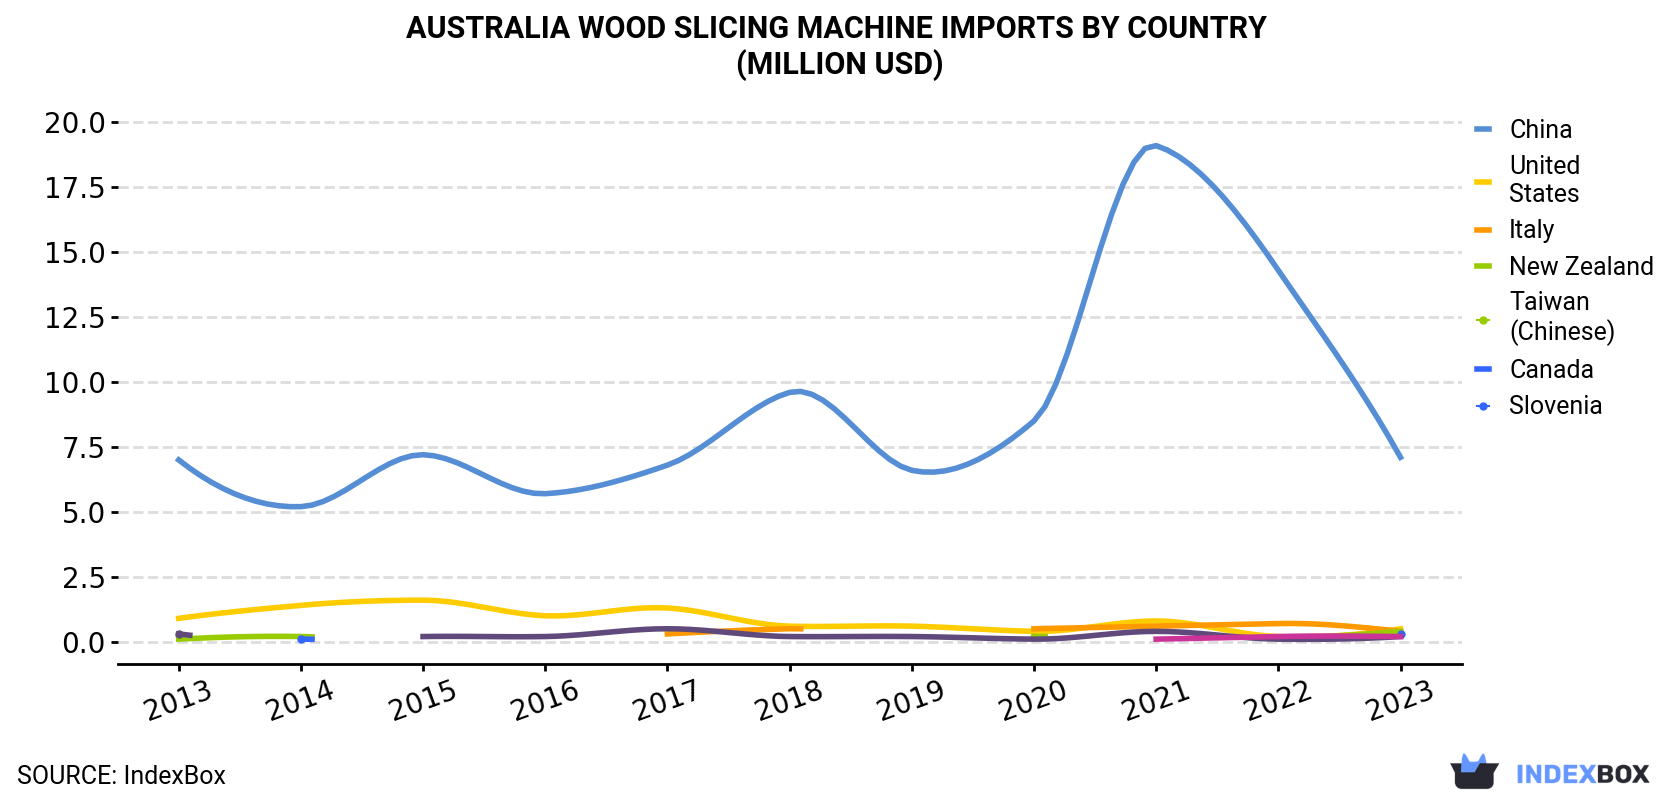 Australia Wood Slicing Machine Imports By Country (Million USD)